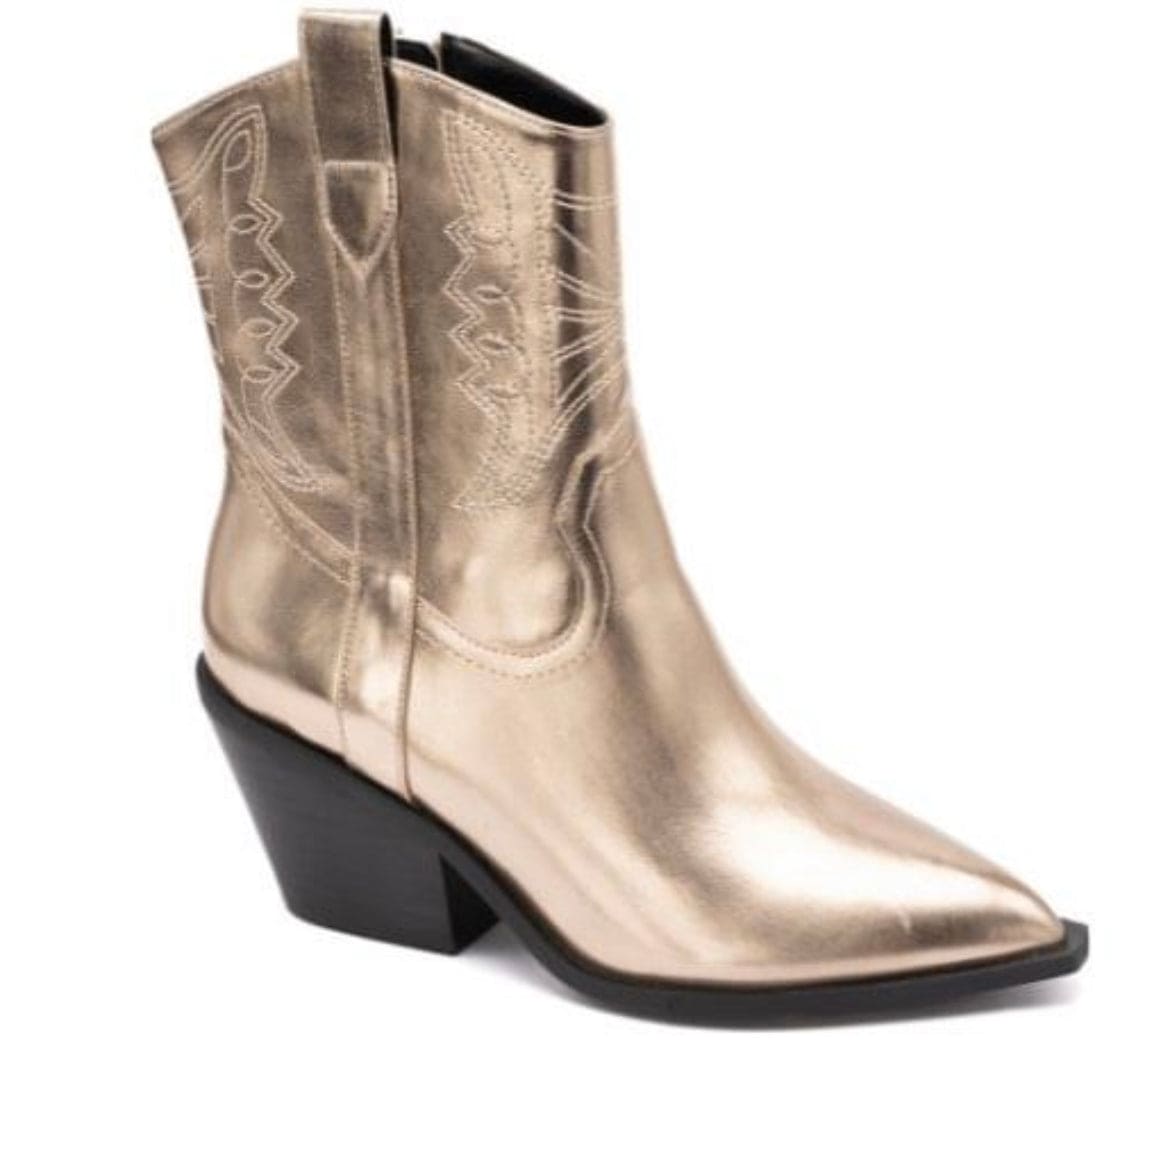 Gold Rowdy boots